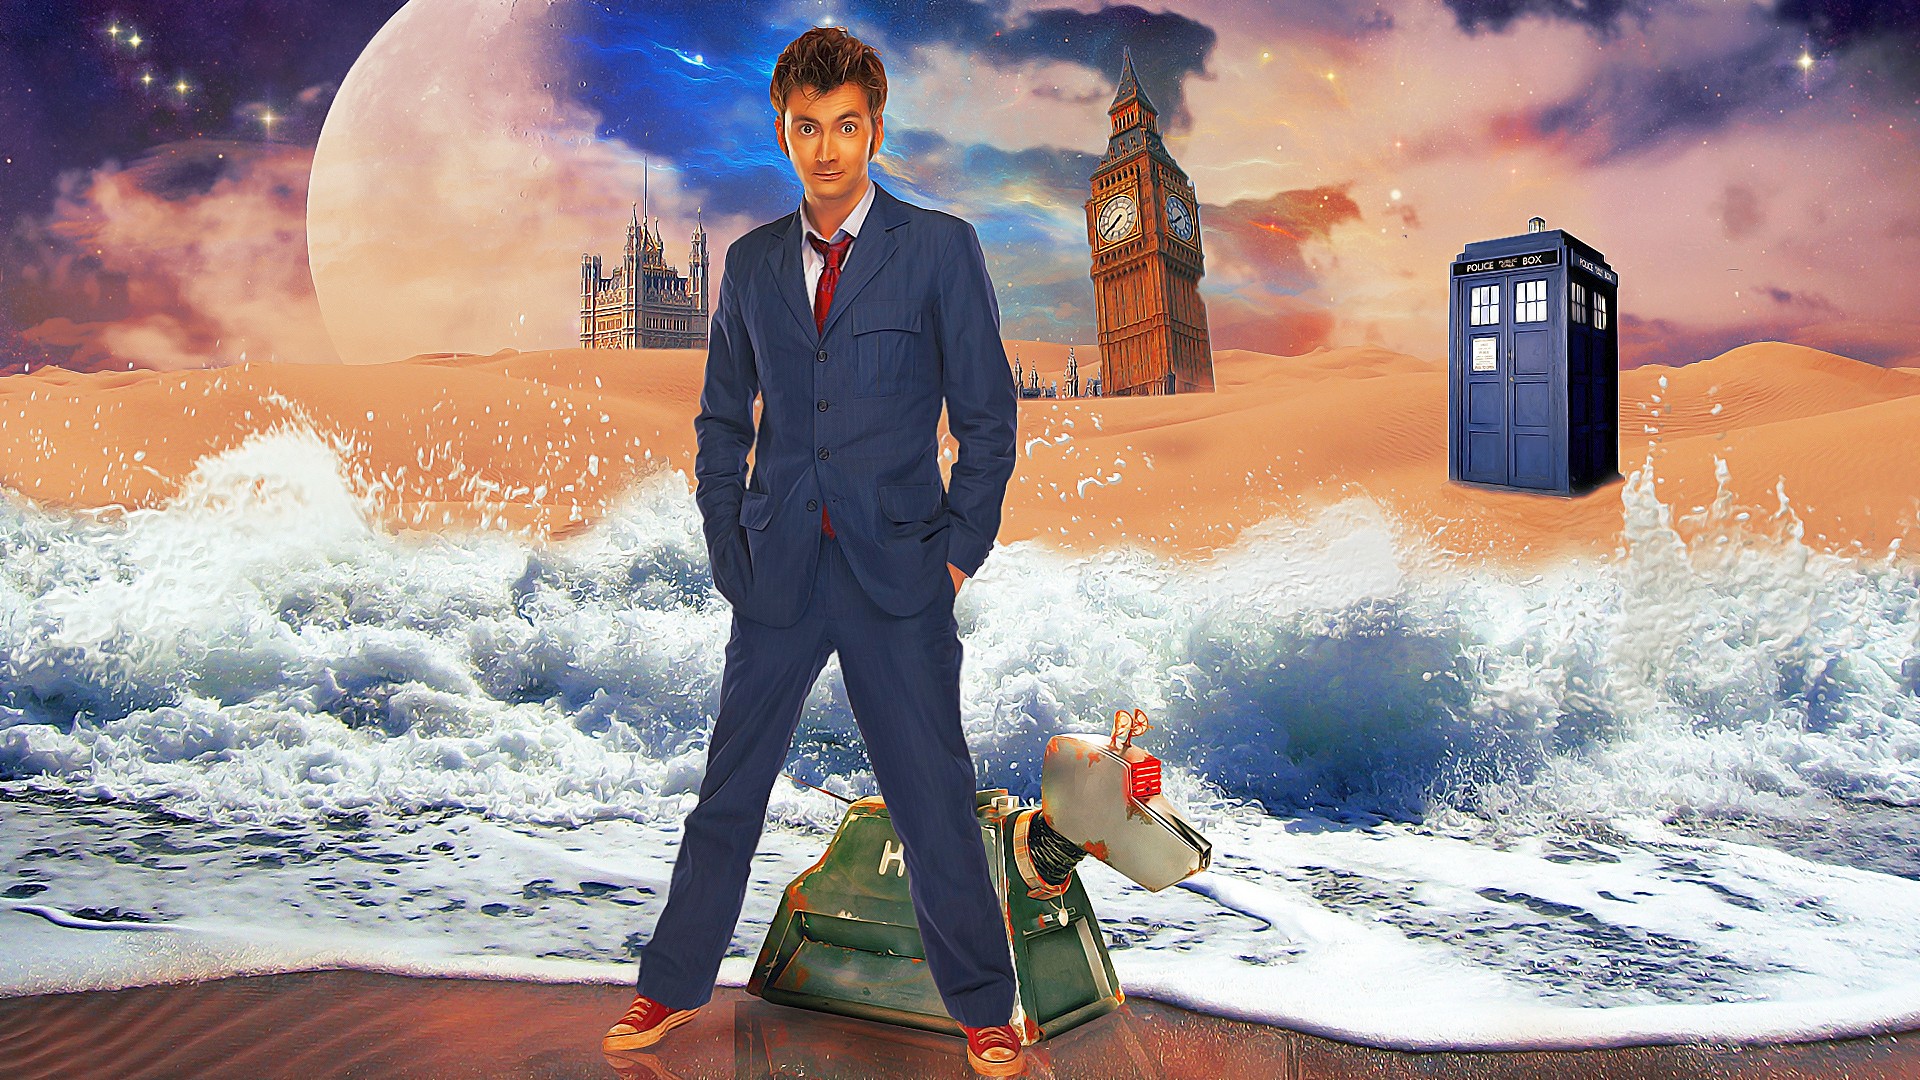 Doctor Who, The Doctor, TARDIS, David Tennant, Tenth Doctor Wallpaper